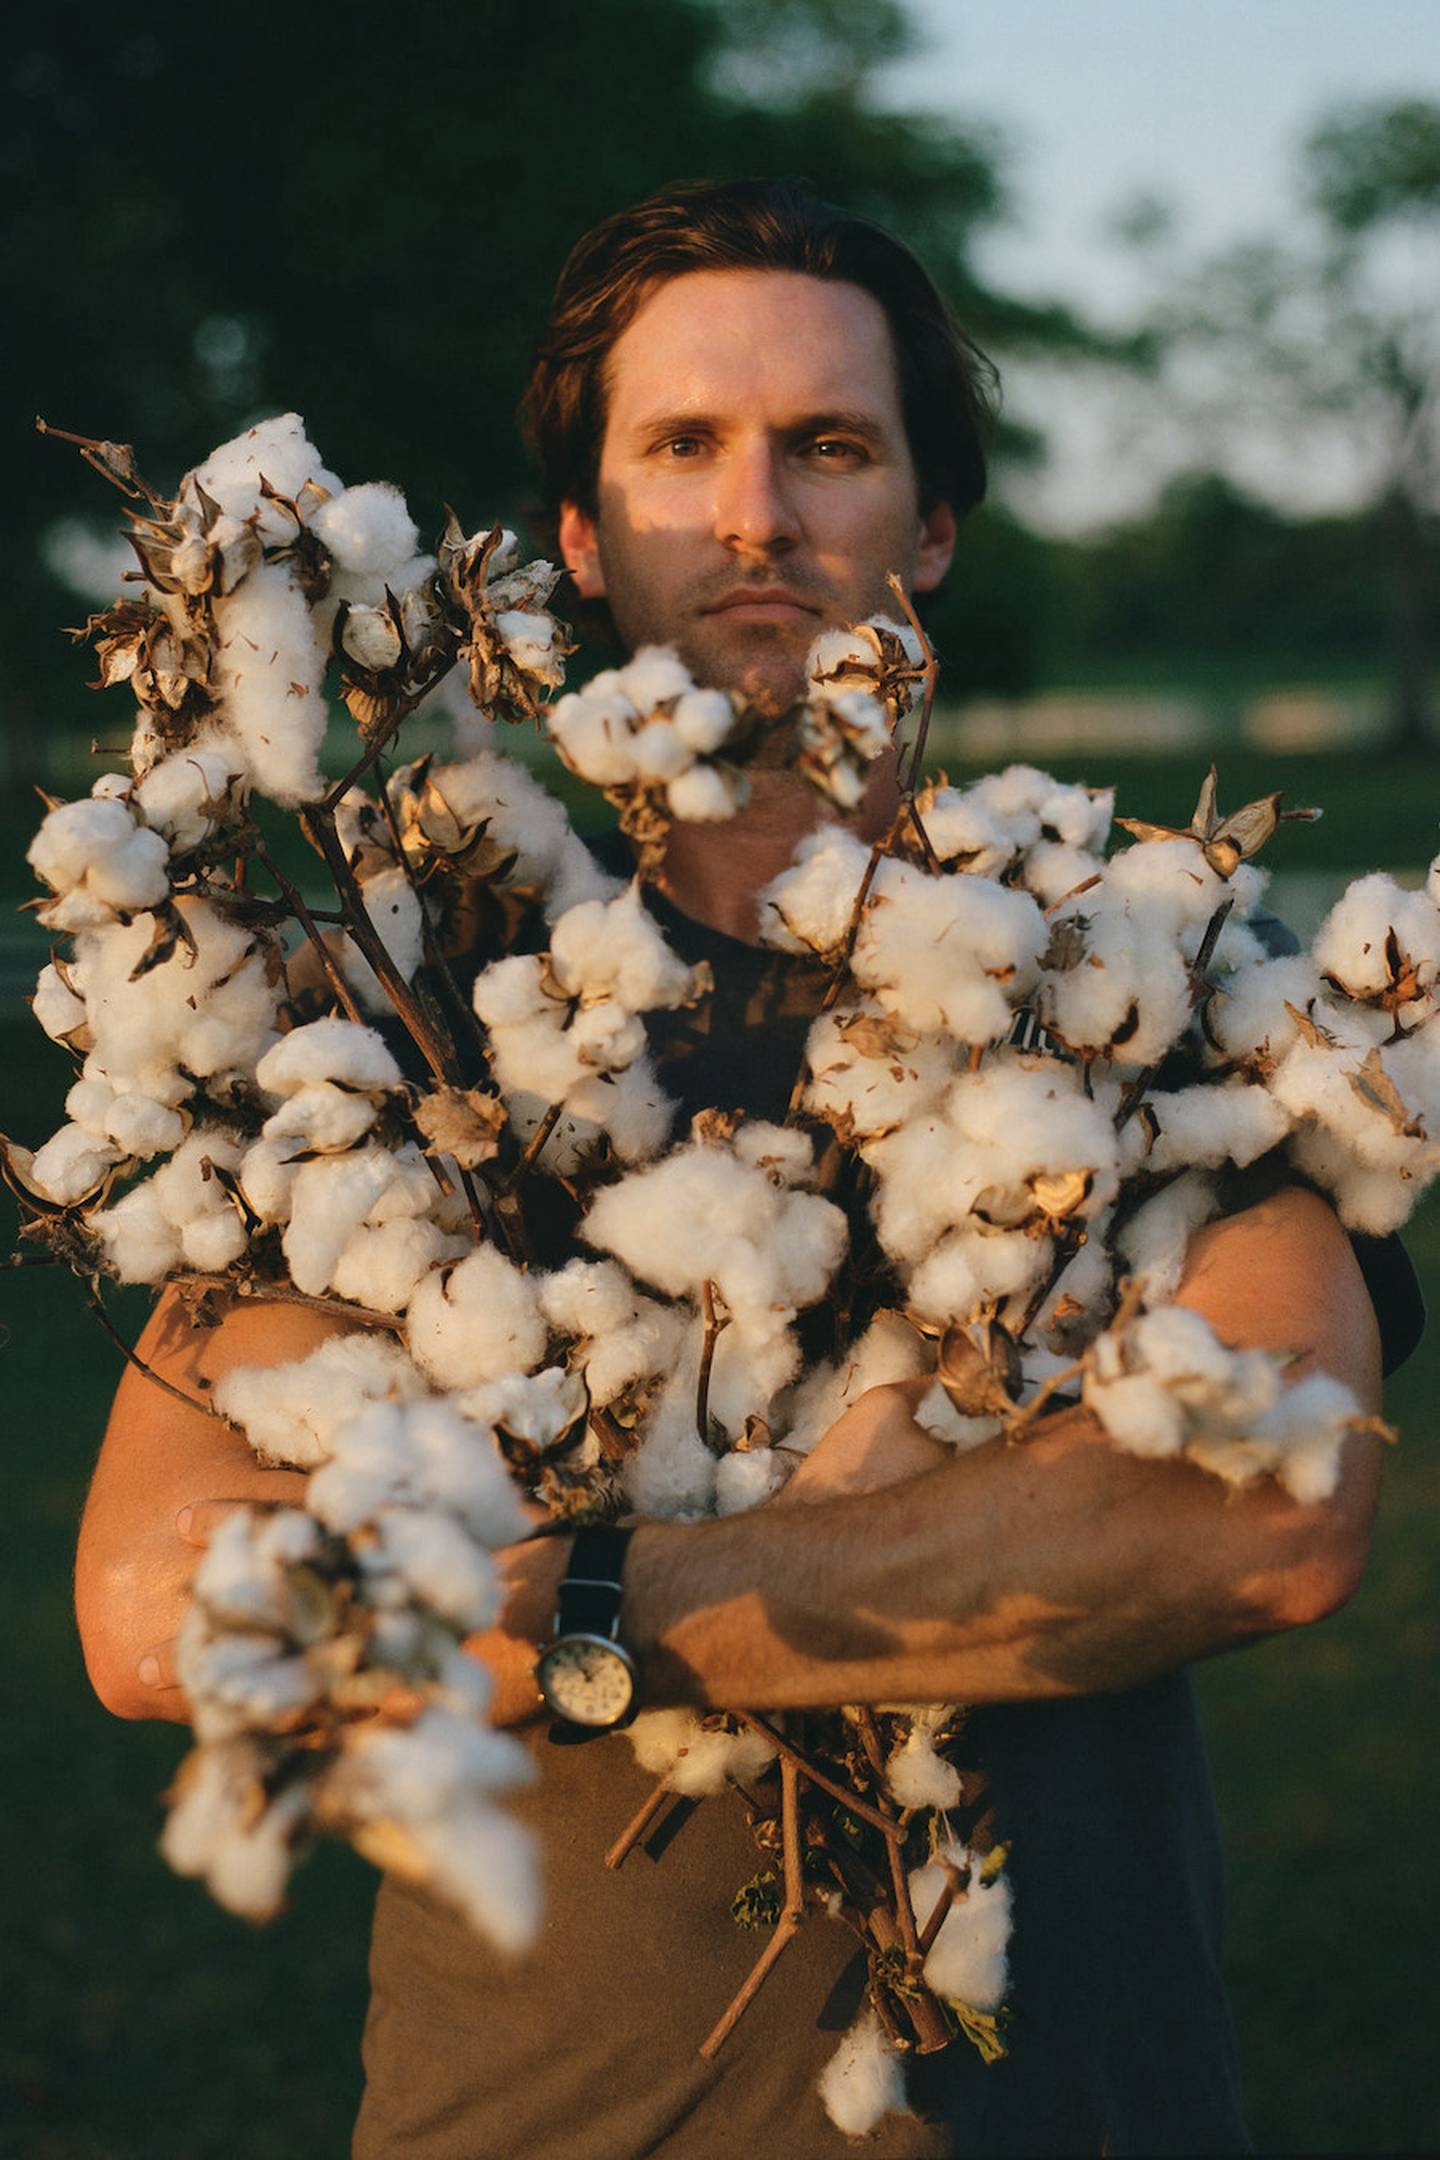 Farmer Marshall Hardwick stands holding an arm of cotton buds.